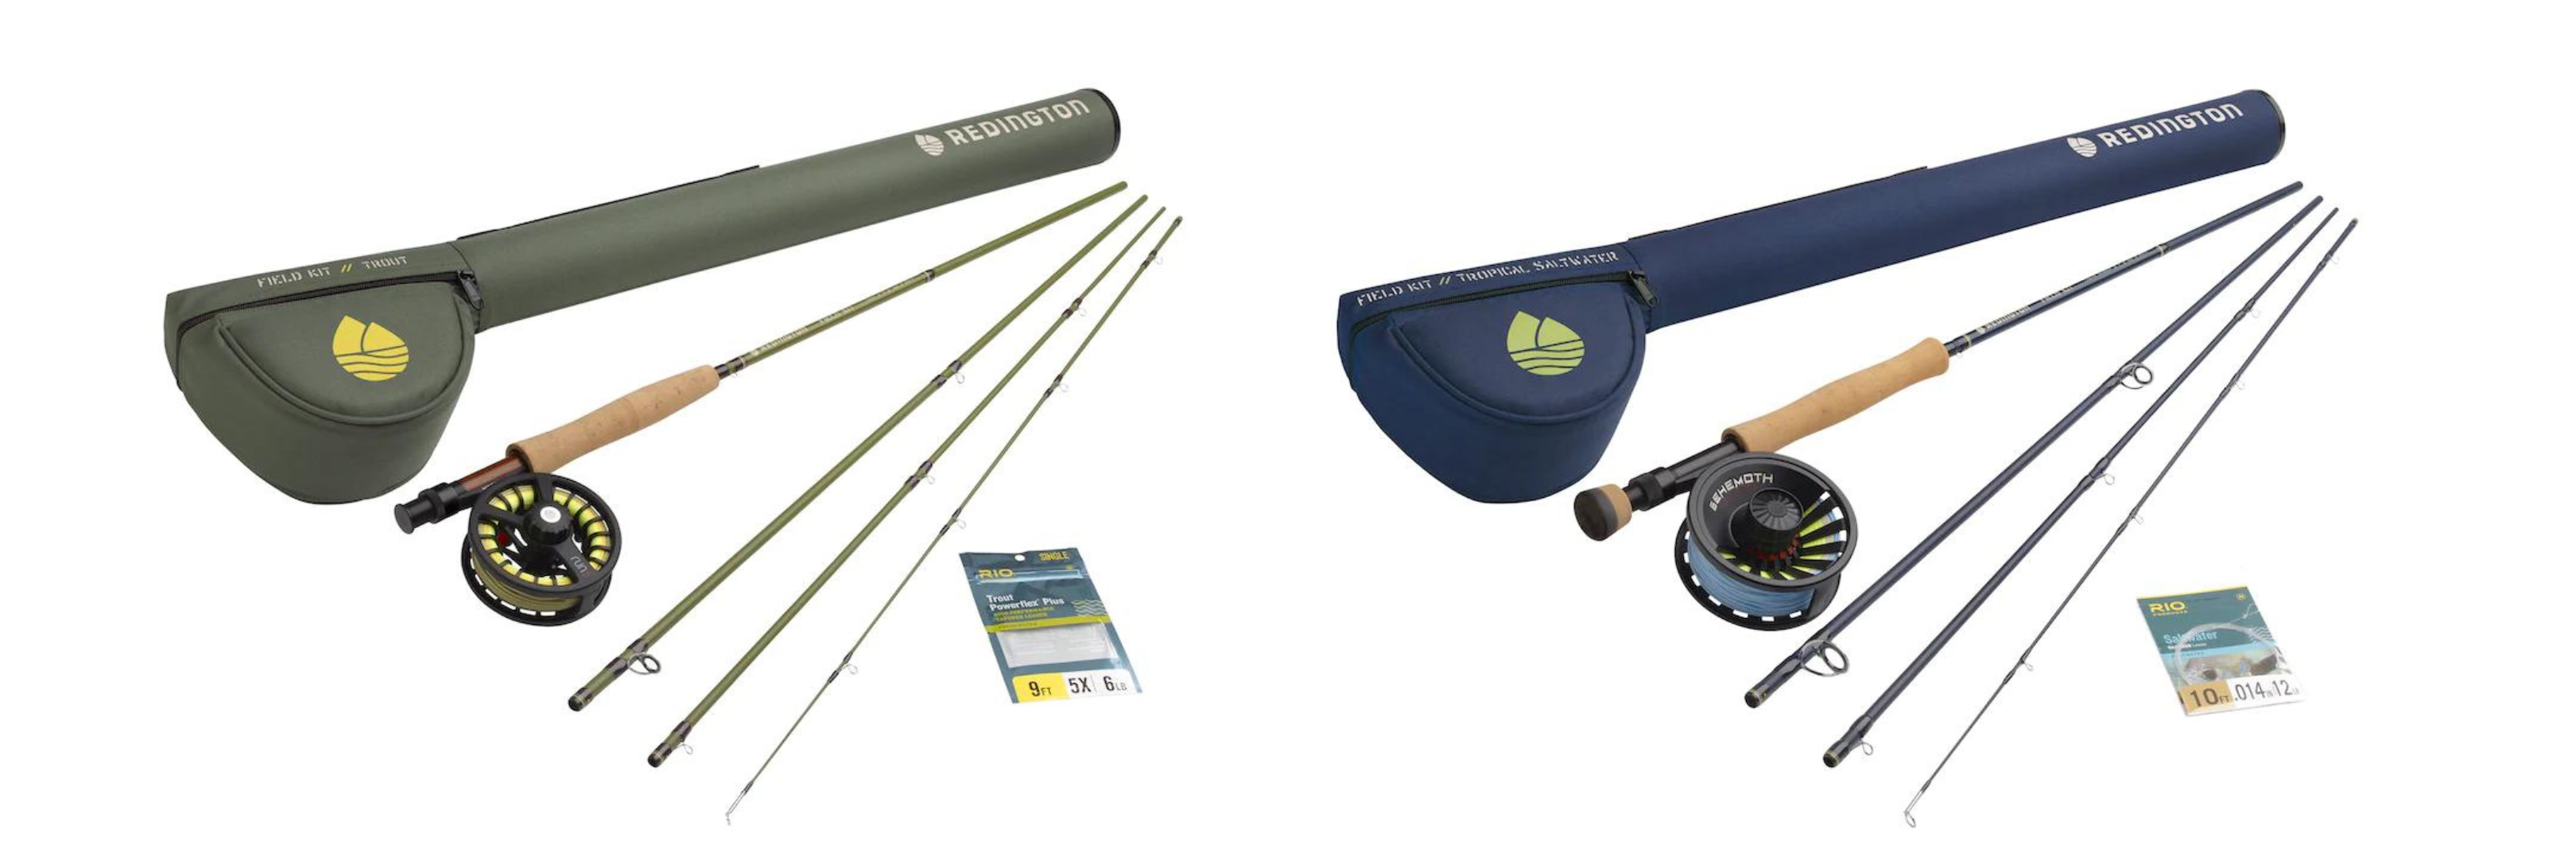 Fly fishing rod and reel combos - Ecotone L'Ami Sport